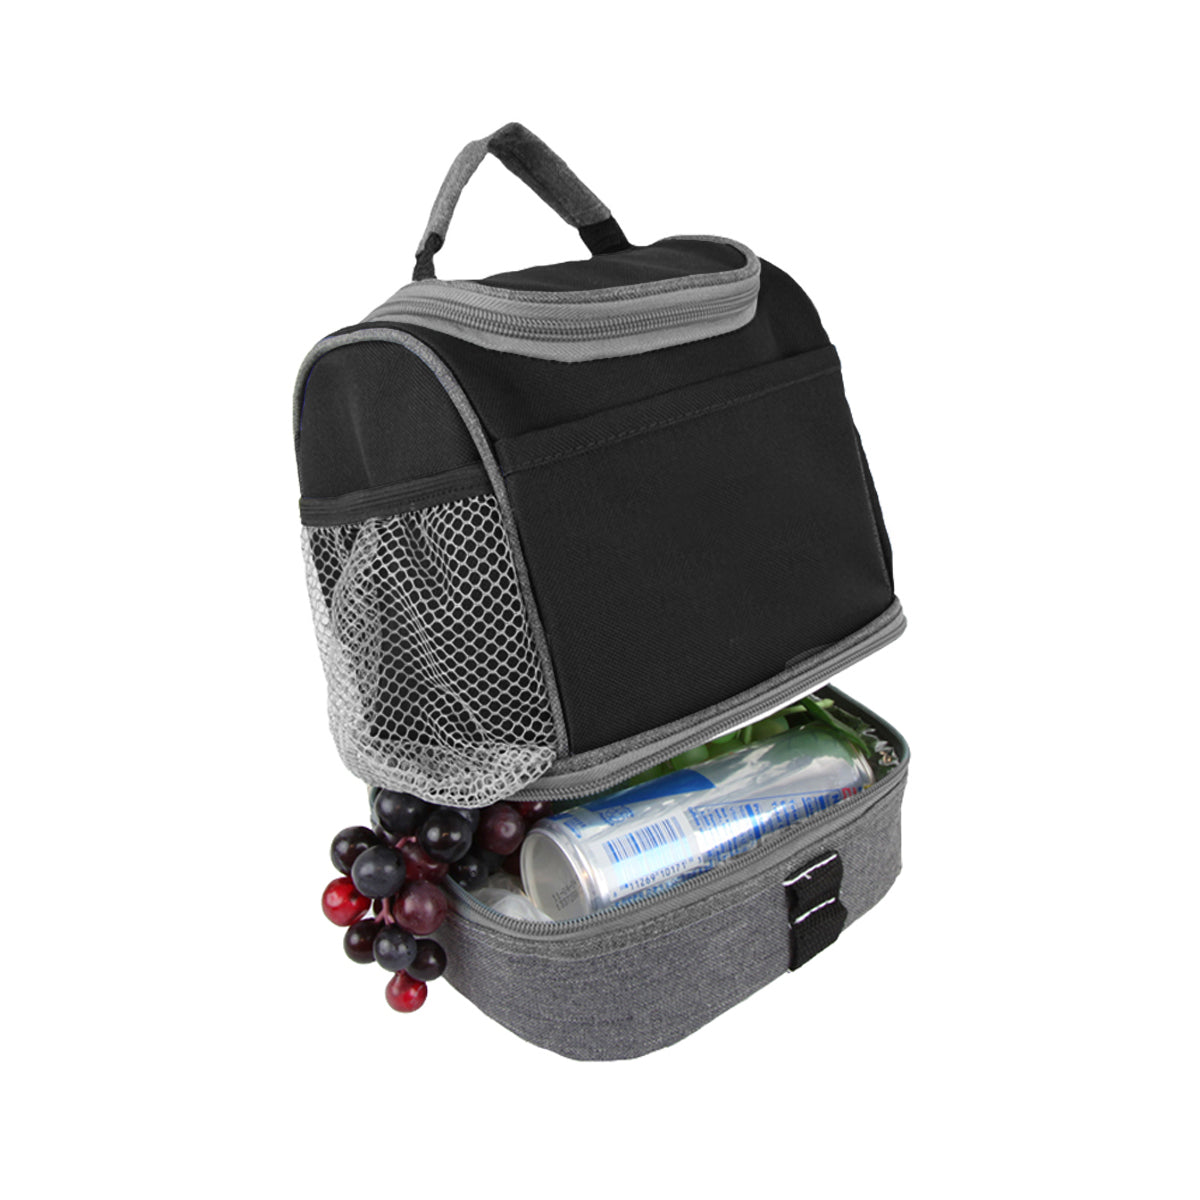 THE COMPACT DUAL LUNCH COOLER